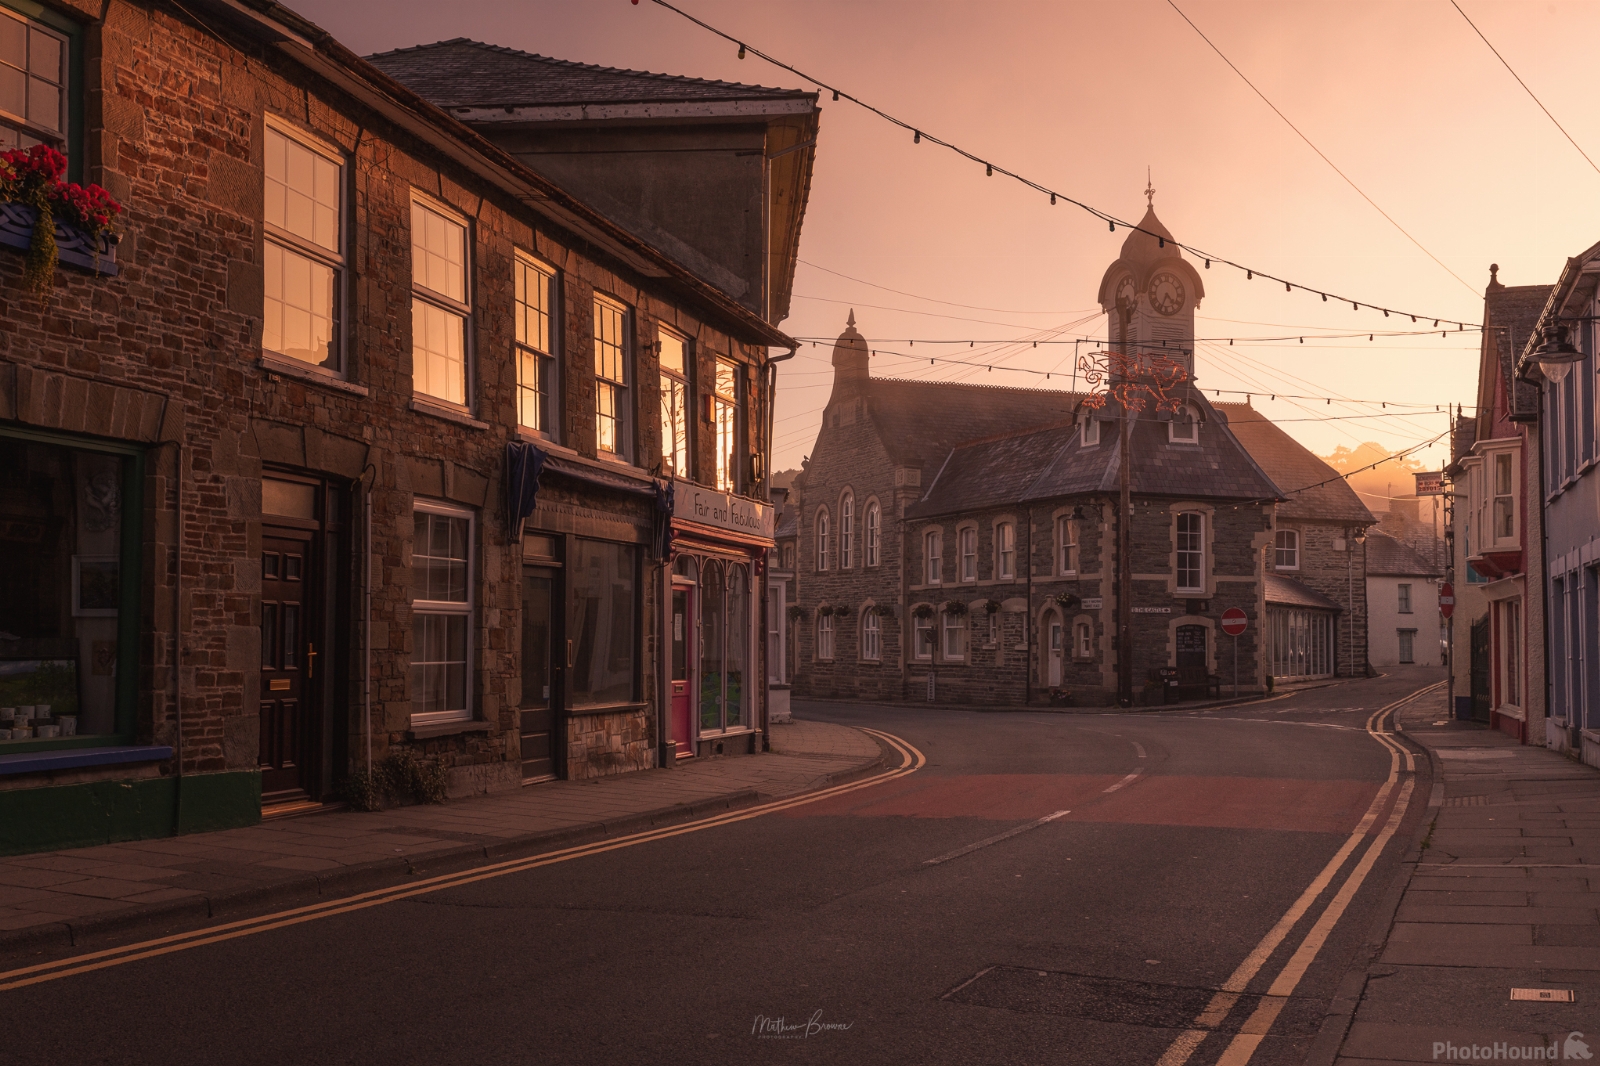 Image of Newcastle Emlyn Market Square by Mathew Browne